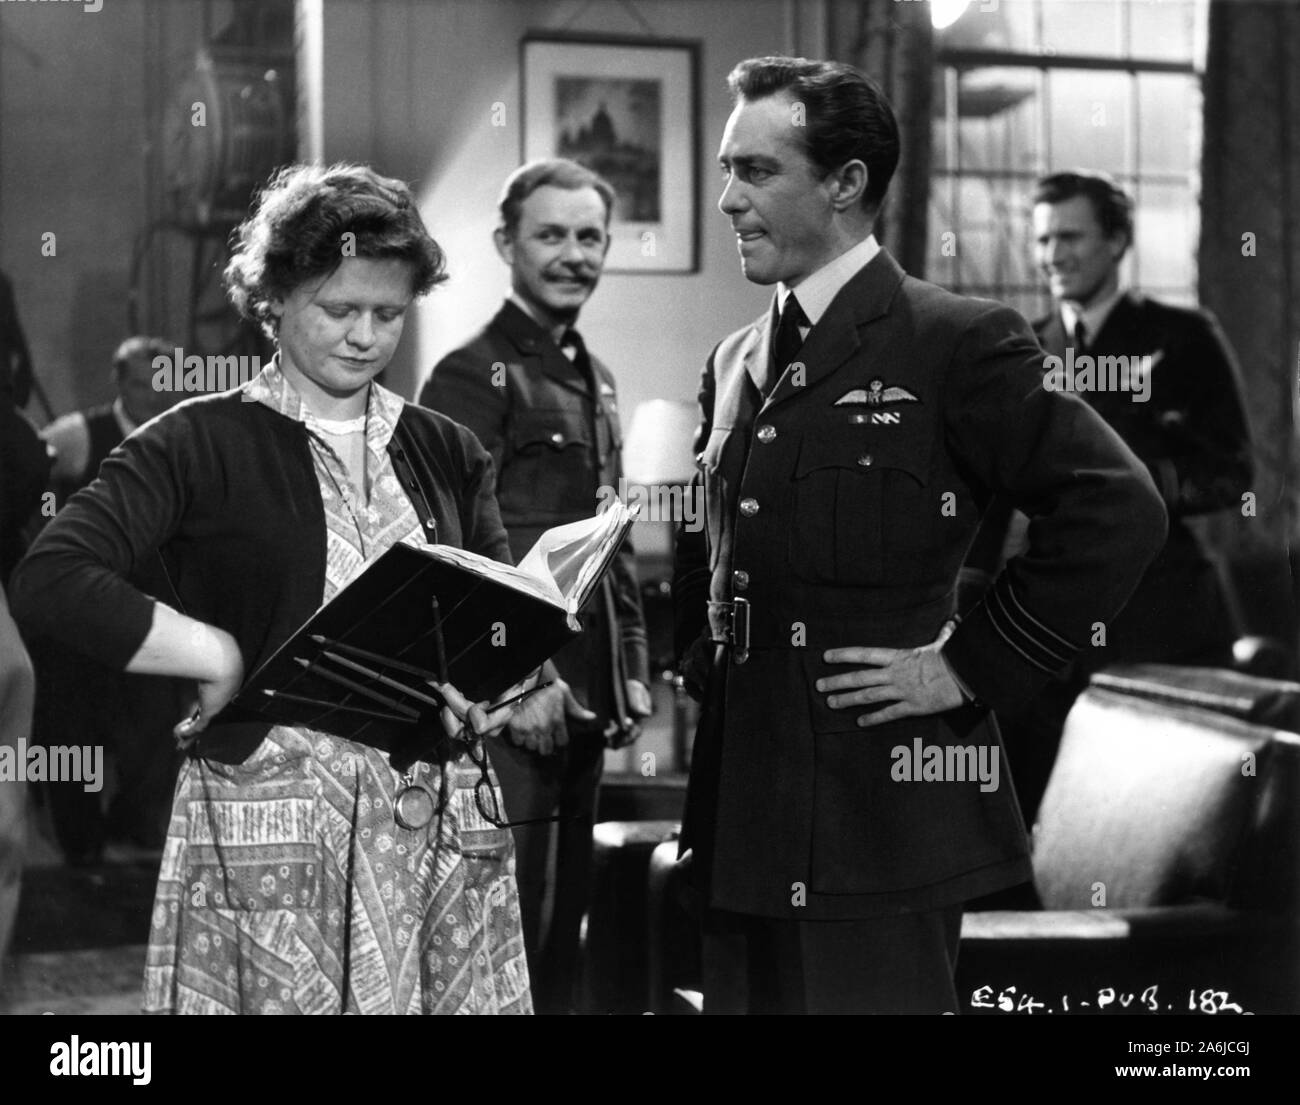 RICHARD TODD as Wing Commander Guy Gibson and BILL KERR as Flight Lieutenant H.B.Martin on set candid with script / continuity girl (possibly Thelma Orr) filming THE DAM BUSTERS 1955 director Michael Anderson books Paul Brickhill and Guy Gibson screenplay R.C. Sherriff Associated British Picture Corporation Stock Photo